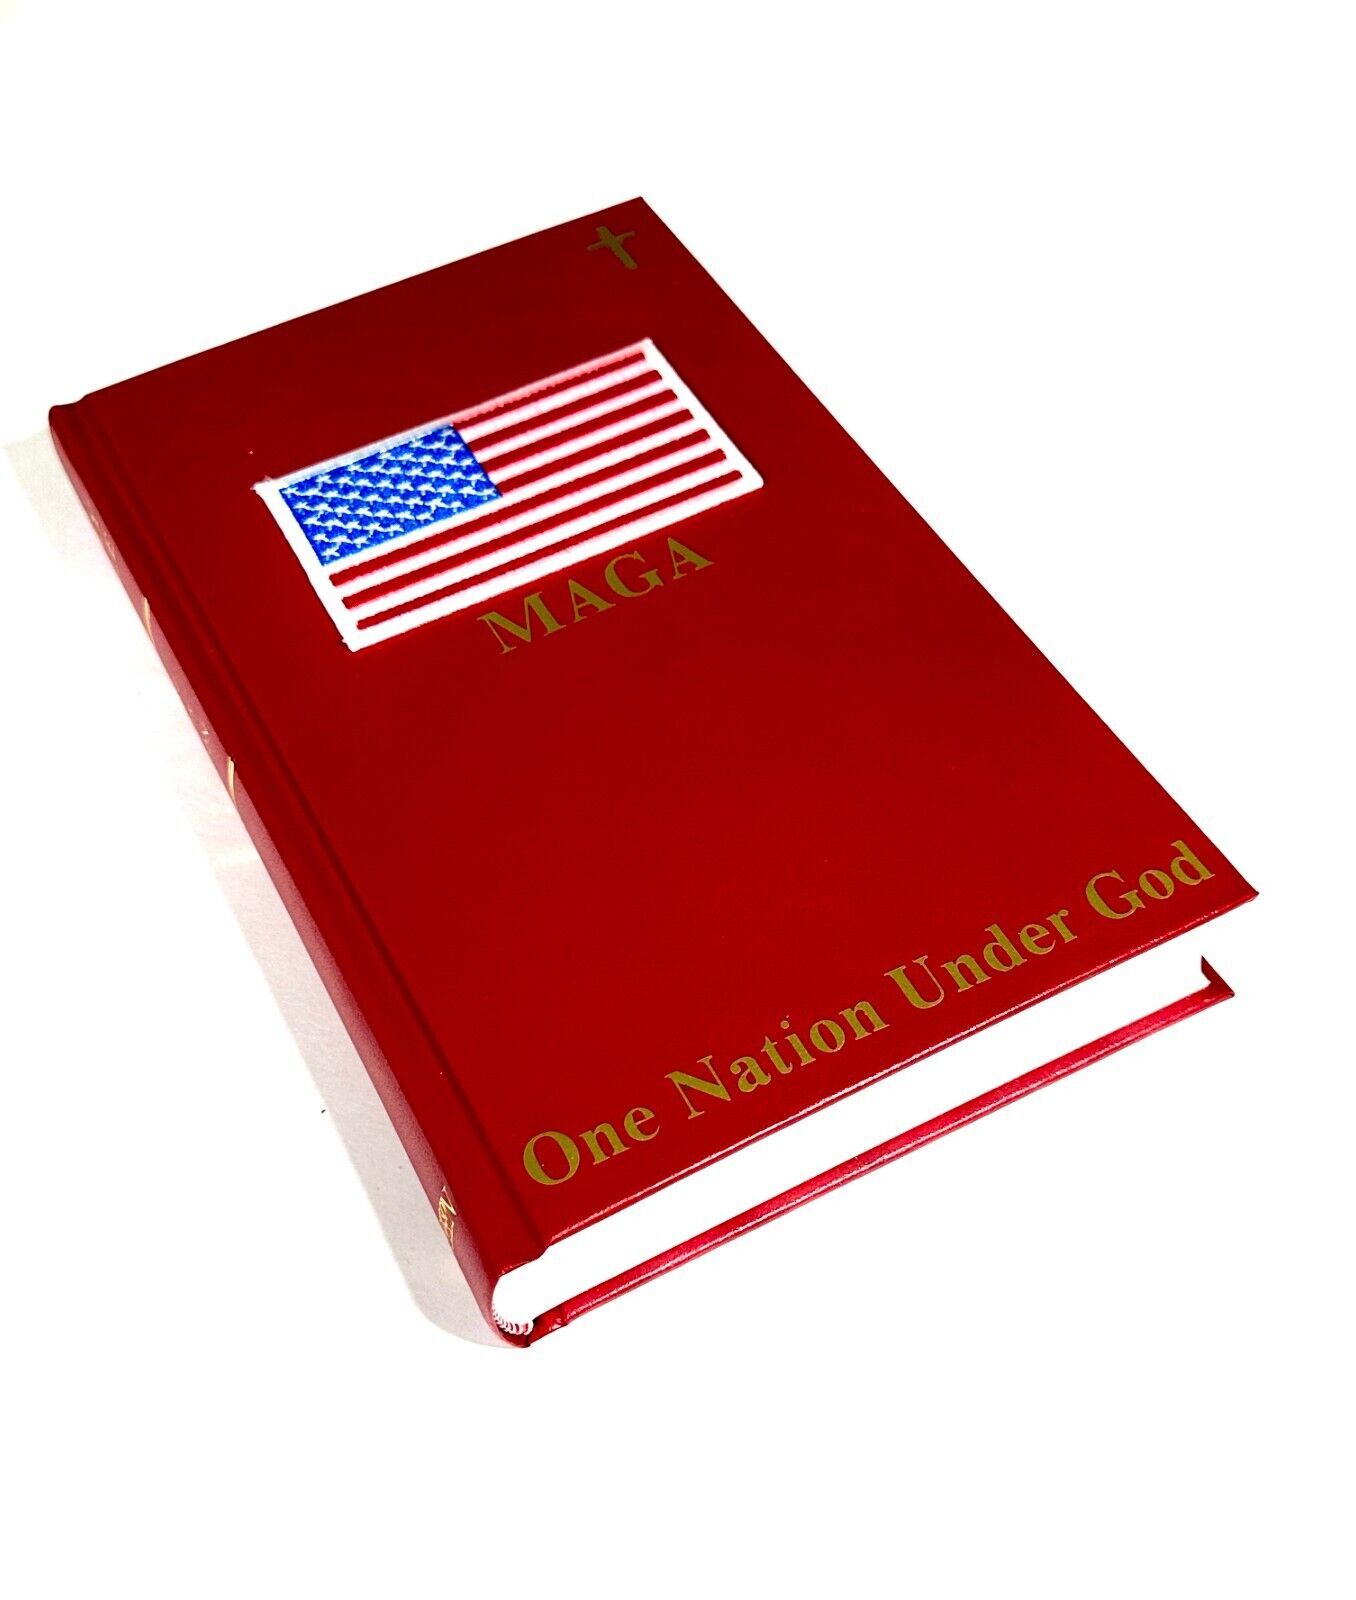 The MAGA Bible; Hardcover, Red, Embroidered Flag, Trump 2024